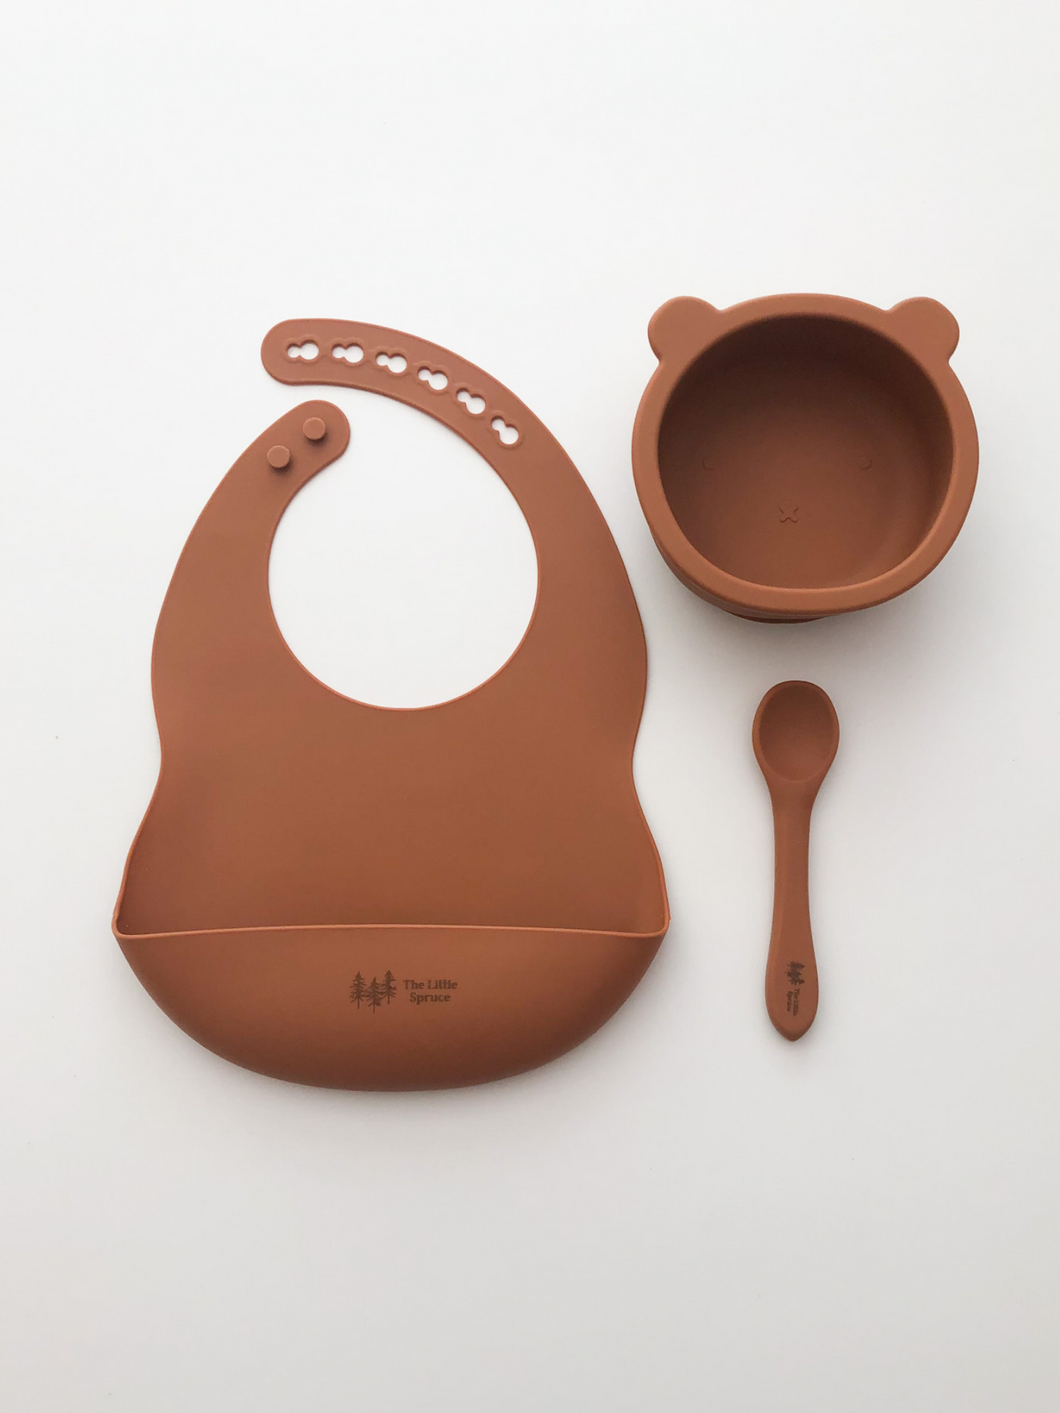 A silicone bib, bear bowl, and spoon in a burnt orange colour. All the items are meant for use by babies or toddlers.